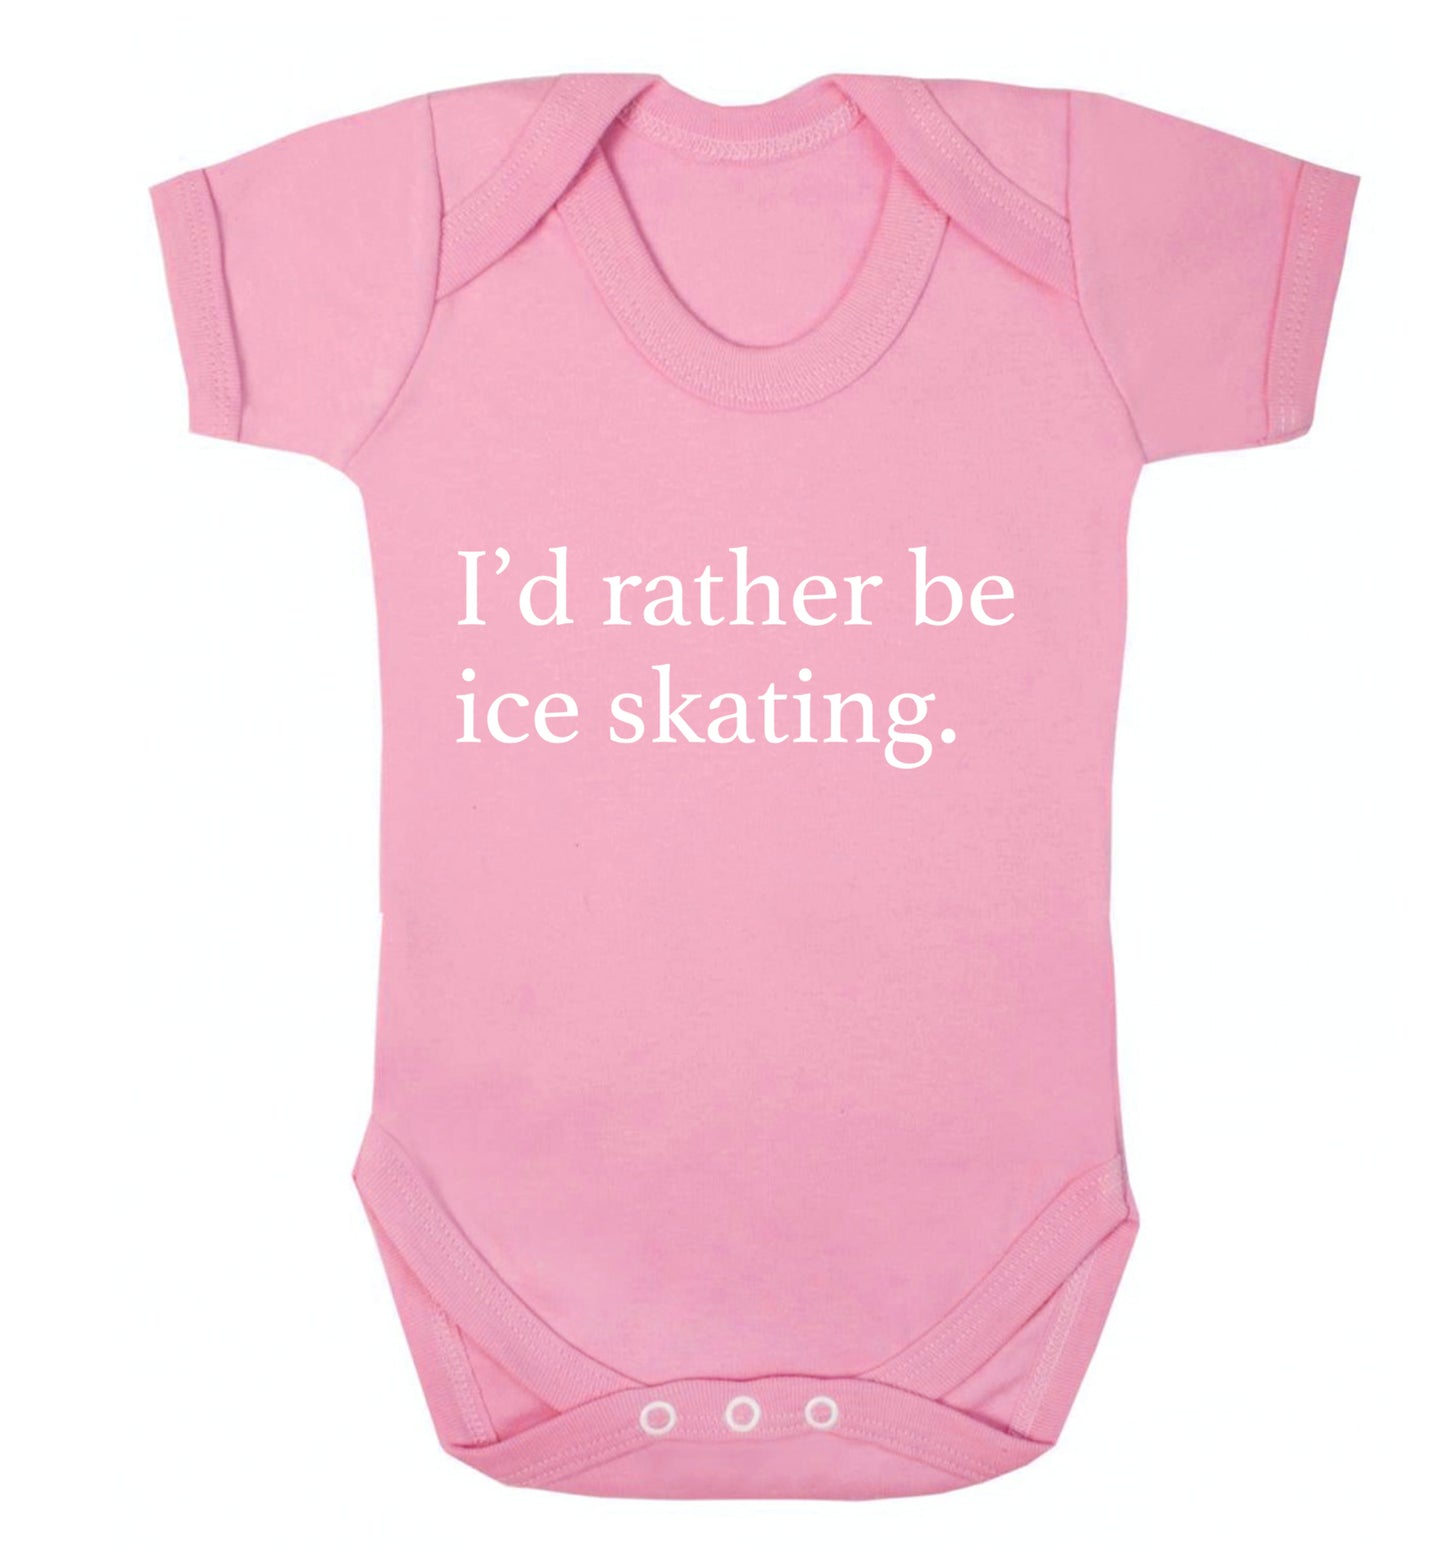 I'd rather be ice skating Baby Vest pale pink 18-24 months